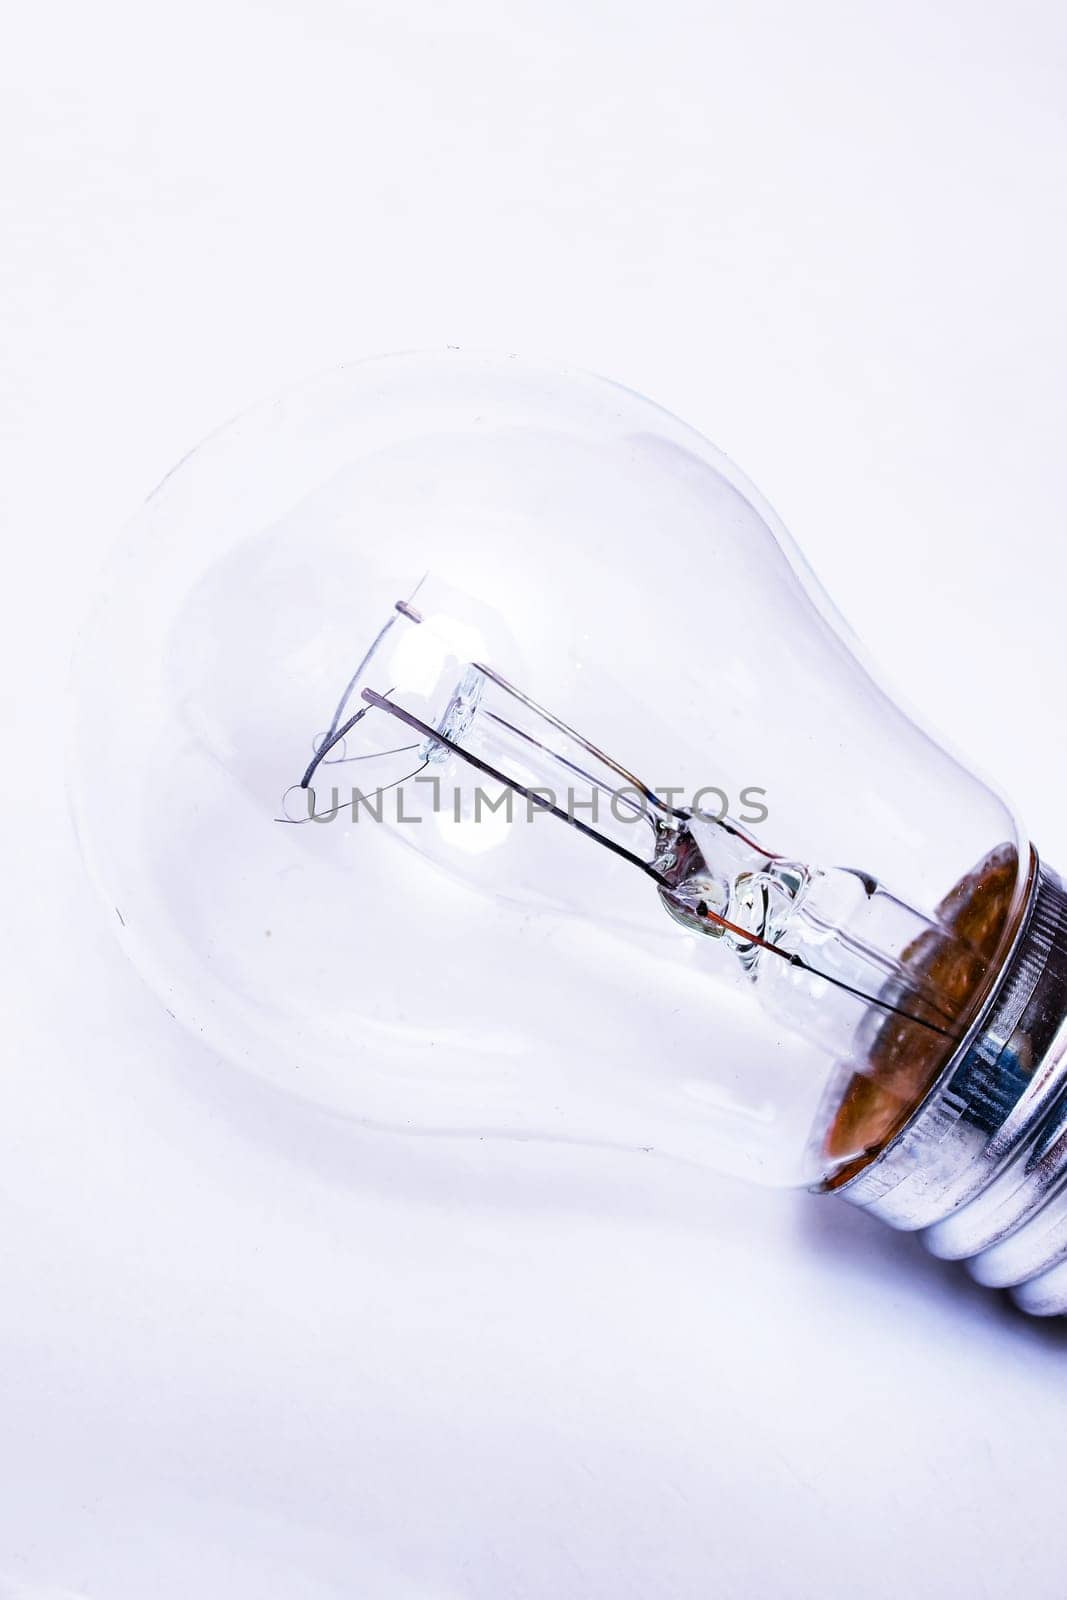 Old light bulb on a gray background close up